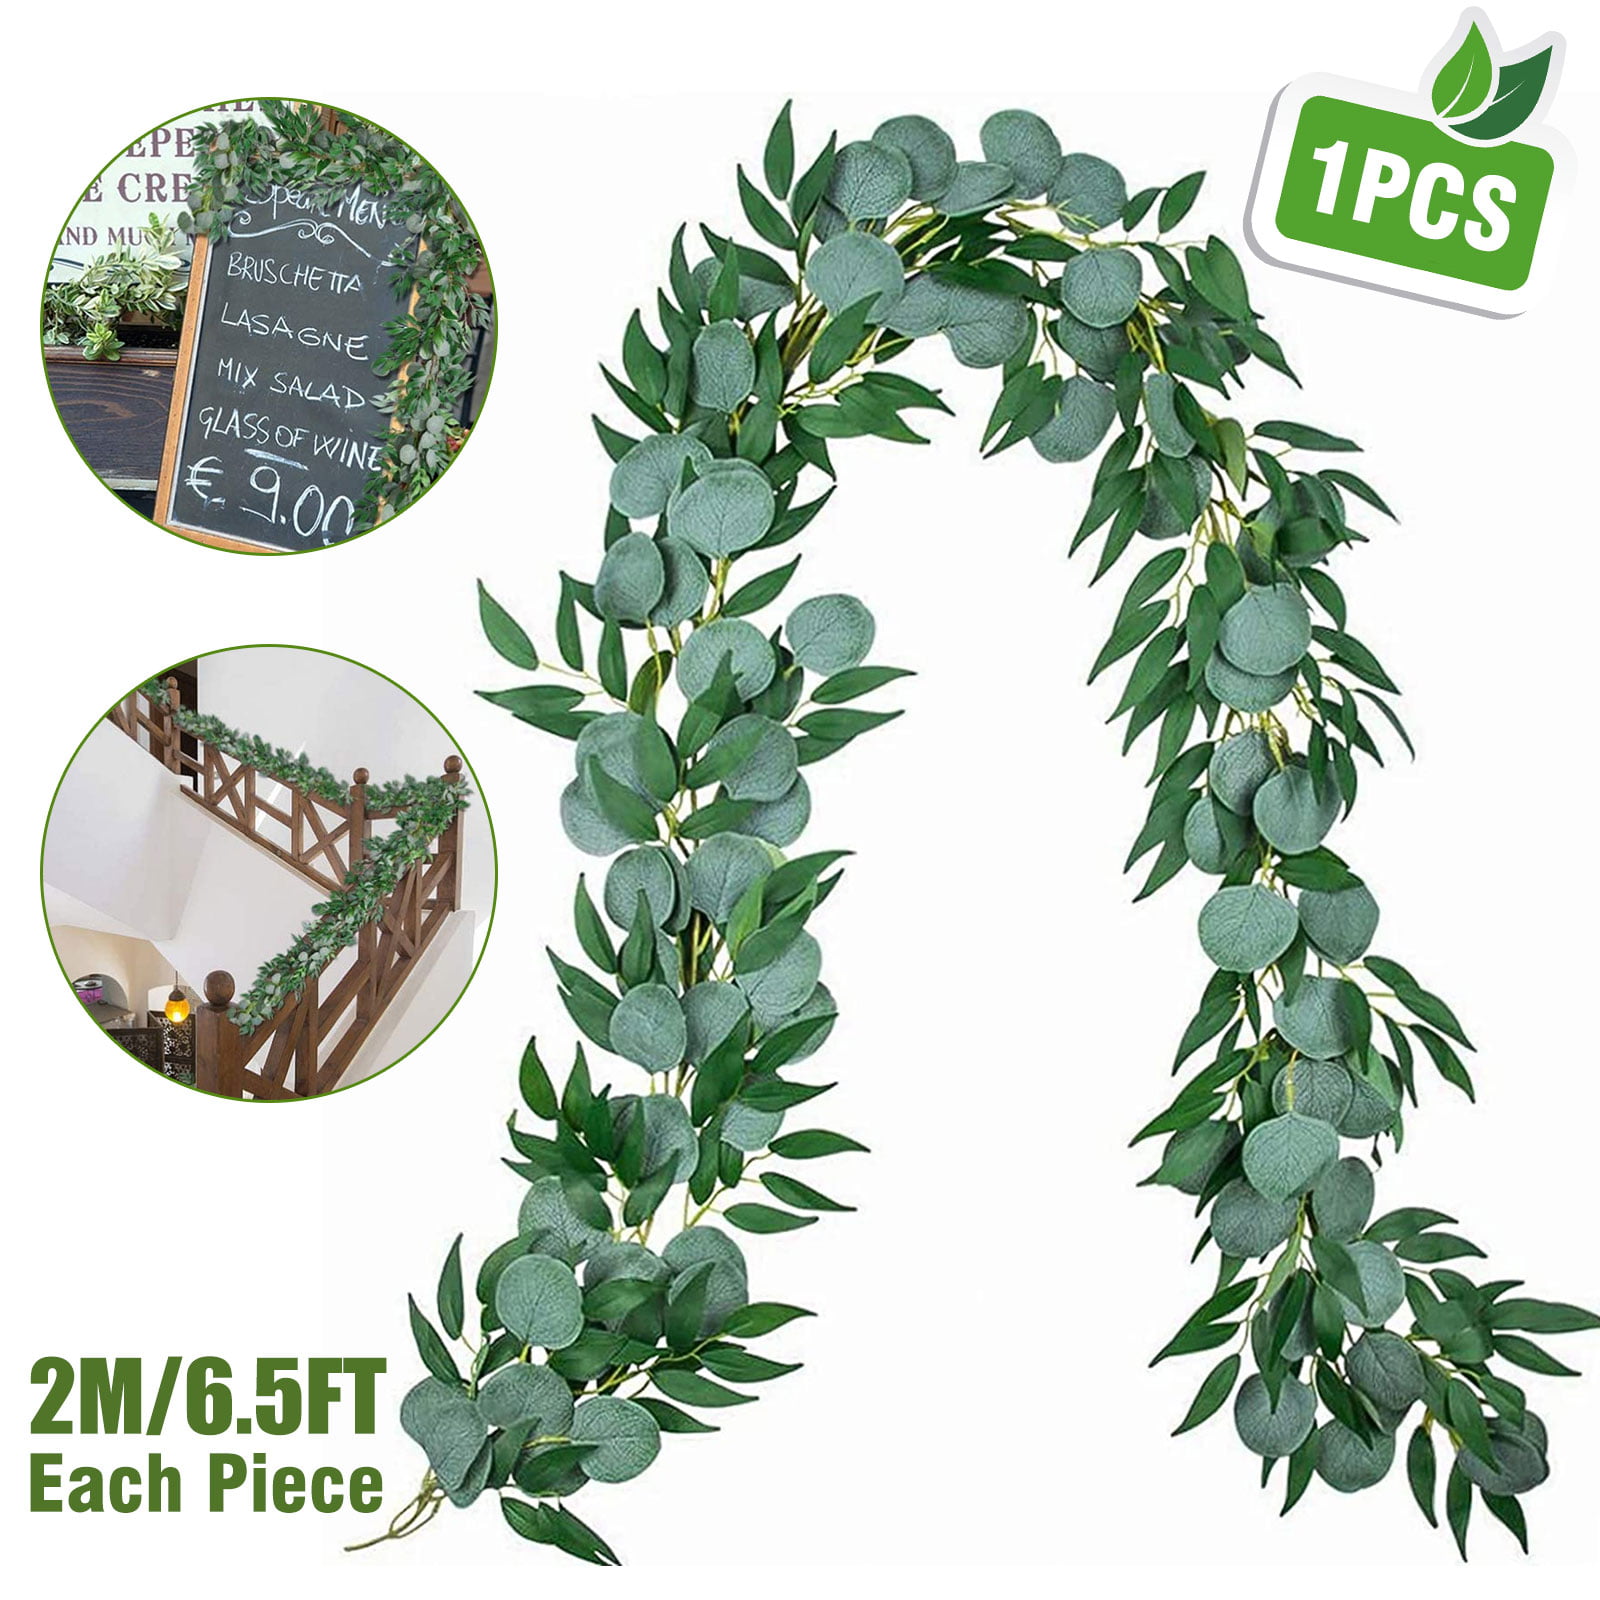 6 Ft Artificial Leaves Garland Willow Vines Faux Silk Rattan Greenery Wedding US 